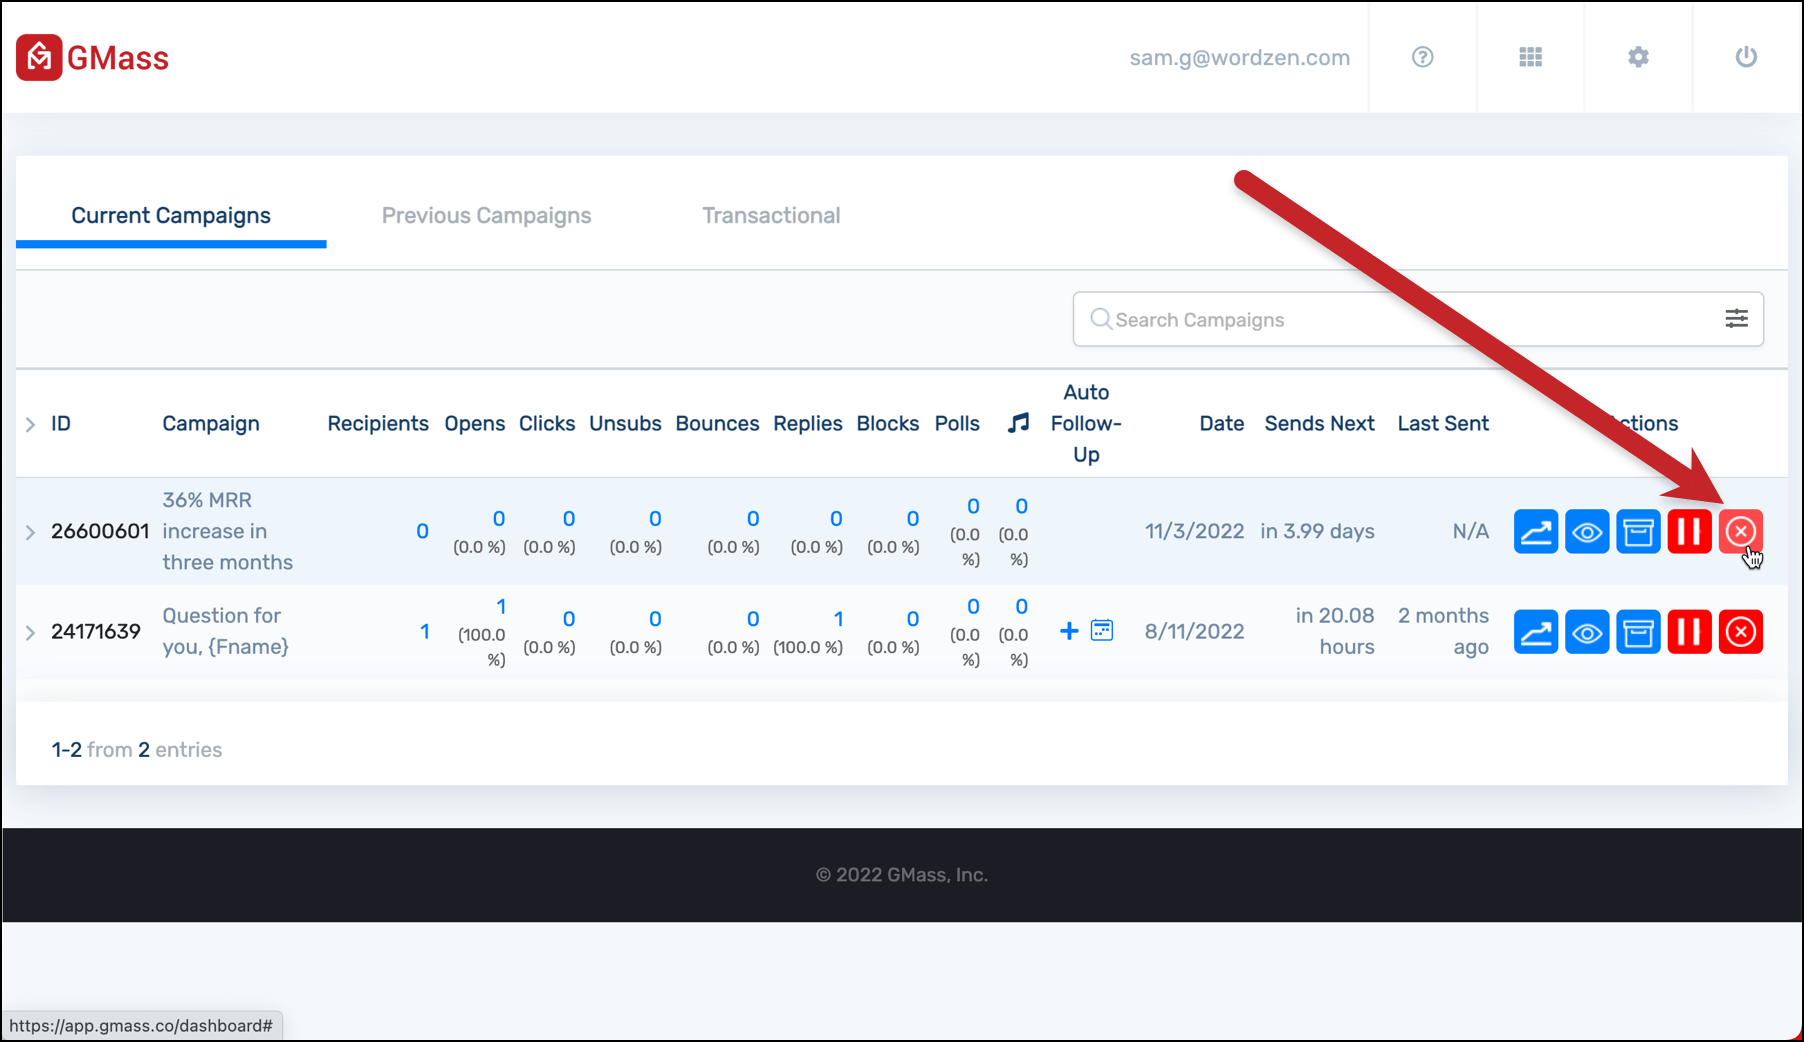 Cancel a campaign from the dashboard